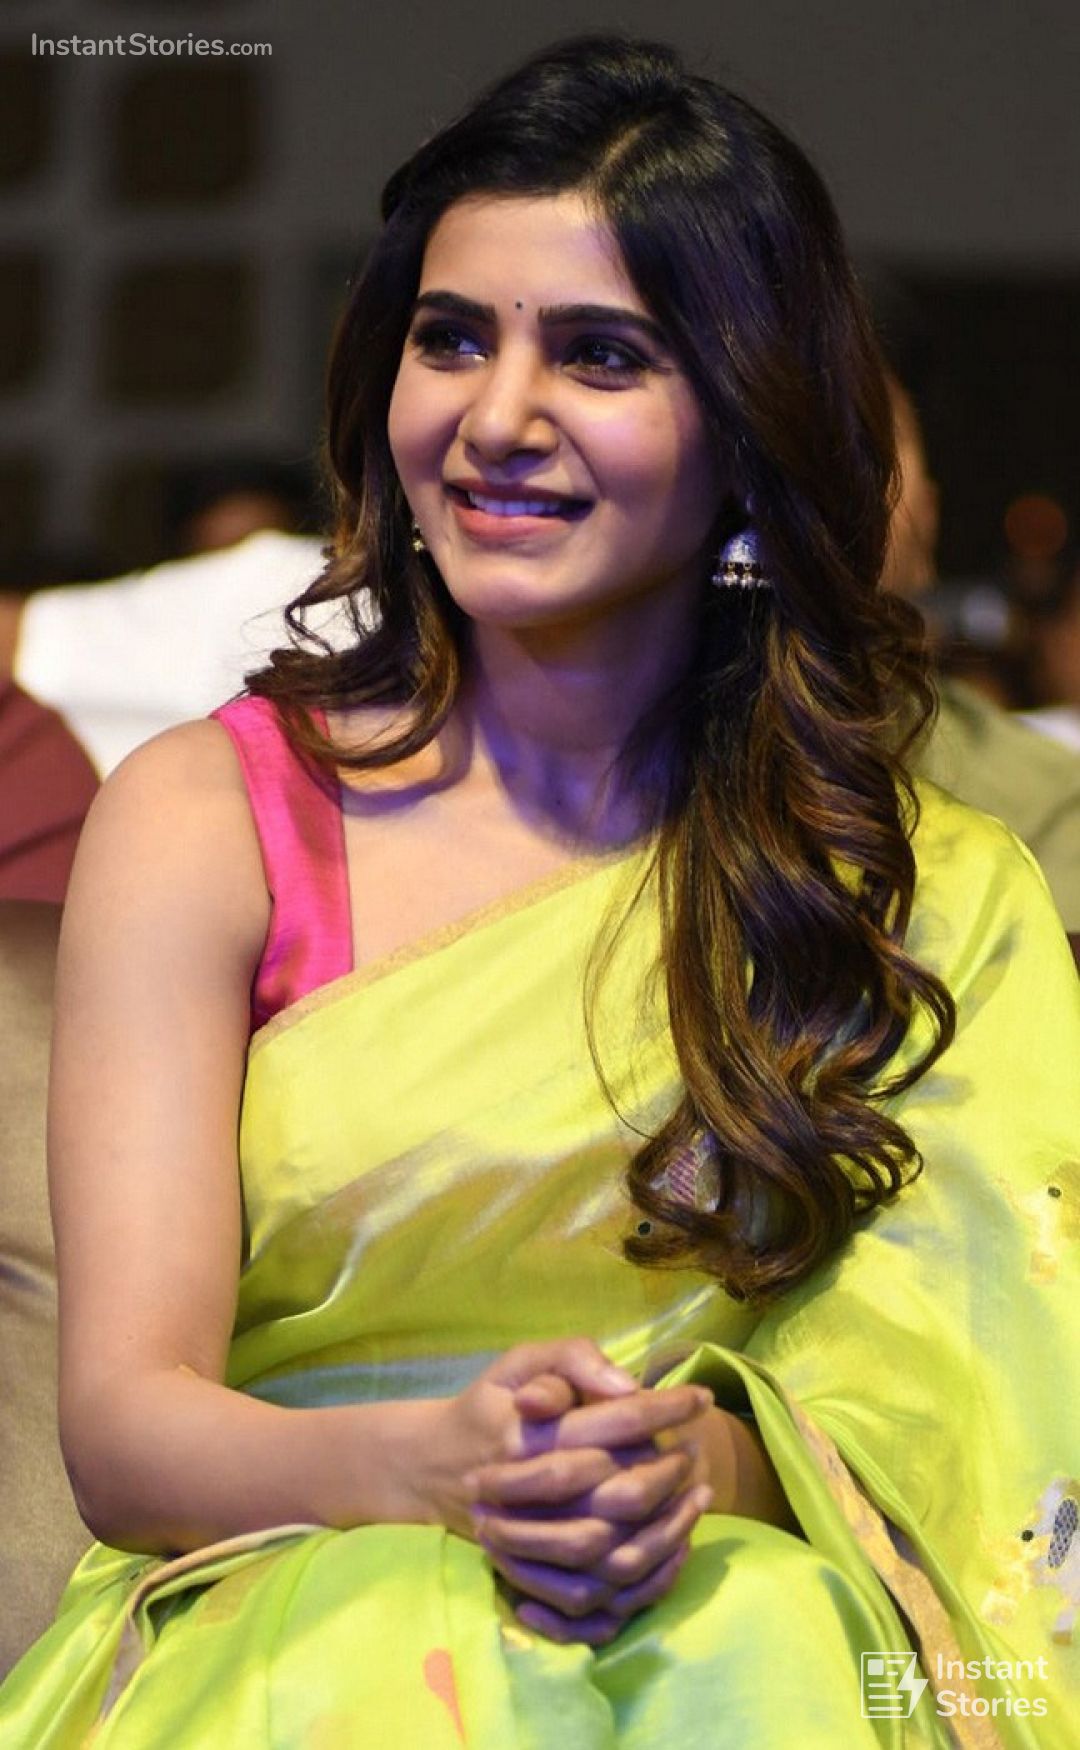 Samantha HD Images - Unbeatable Collection of Over 999 Astonishing Images  in Full 4K